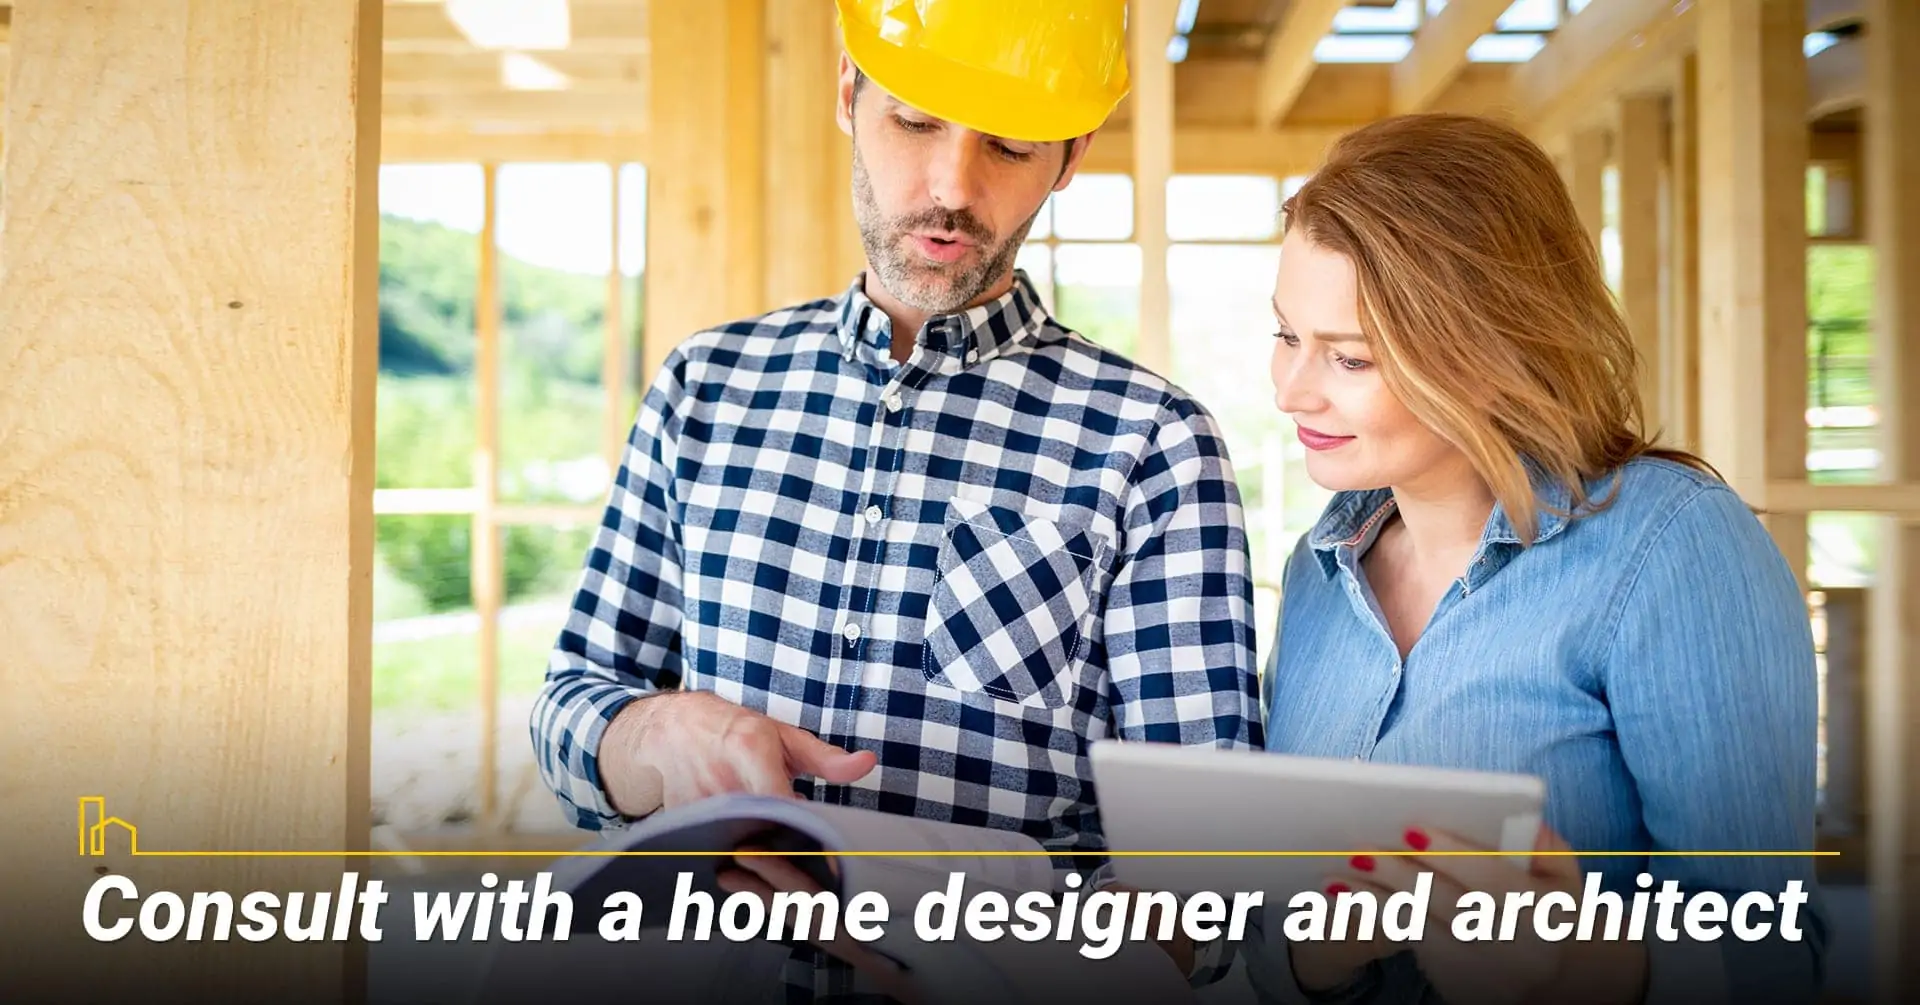 Consult with a home designer and architect, consult with the professionals